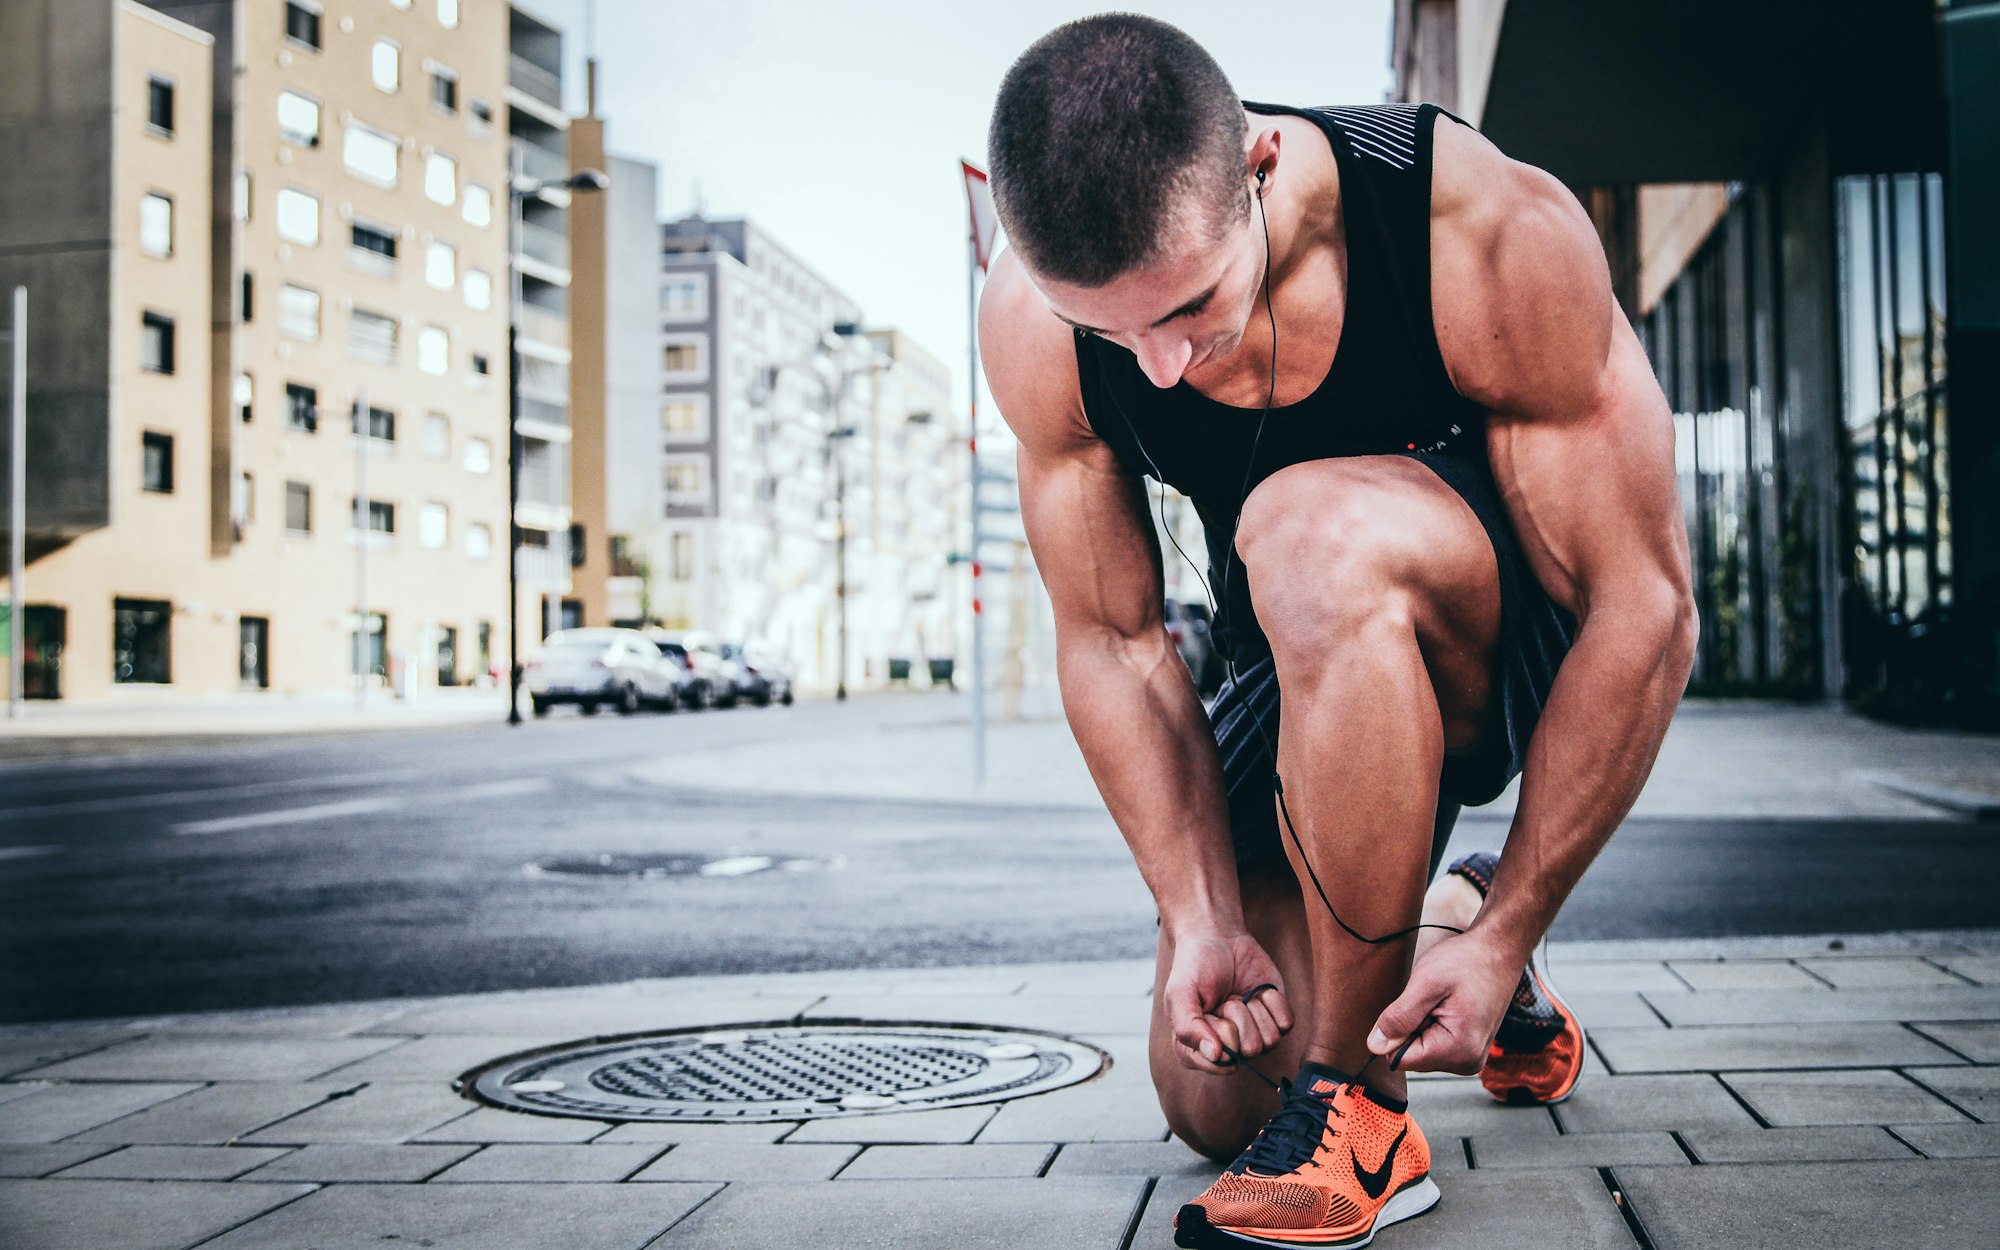 Running is influnced by gut health and athletic performance by Alexander Redl for Unsplash.